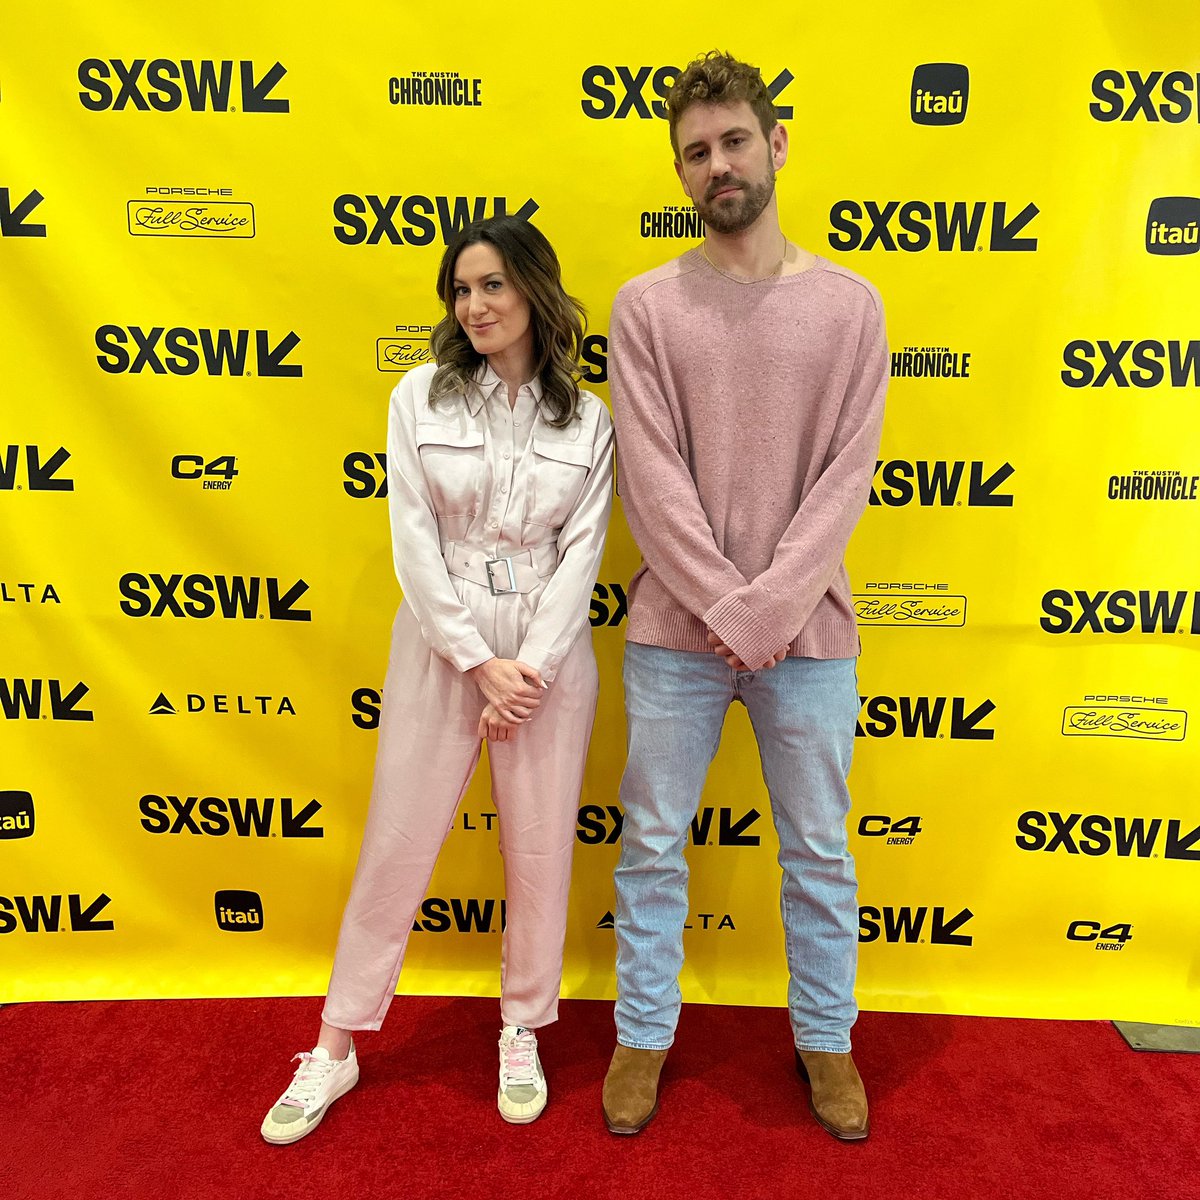 SXSW, that was fun! Talking podcasting and emerging media with @NickViall.